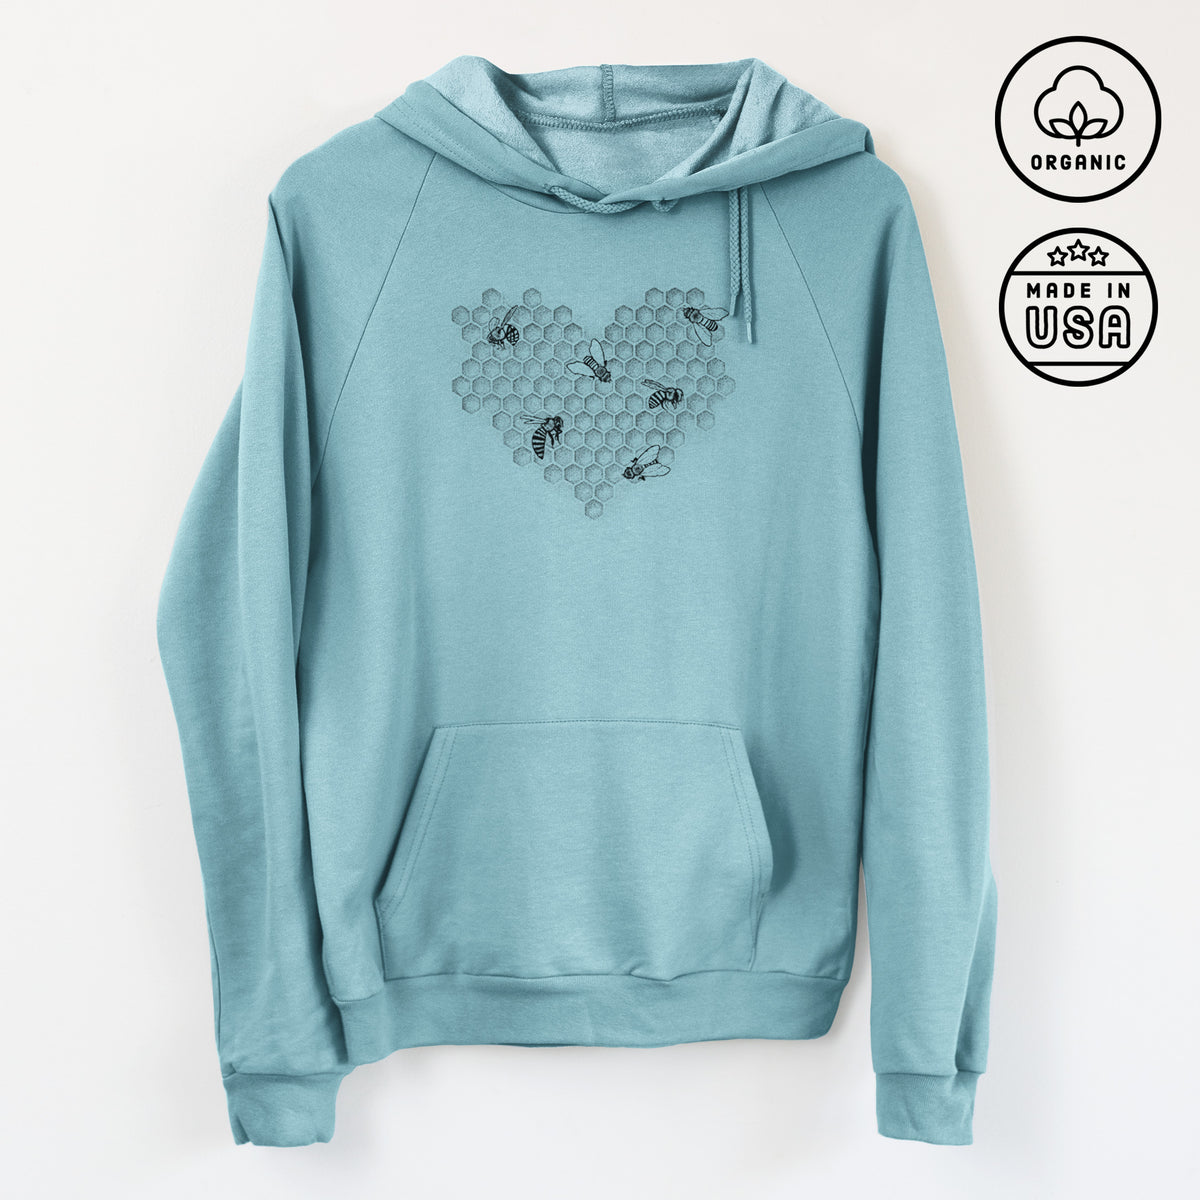 Honeycomb Heart with Bees - Unisex Pullover Hoodie - Made in USA - 100% Organic Cotton